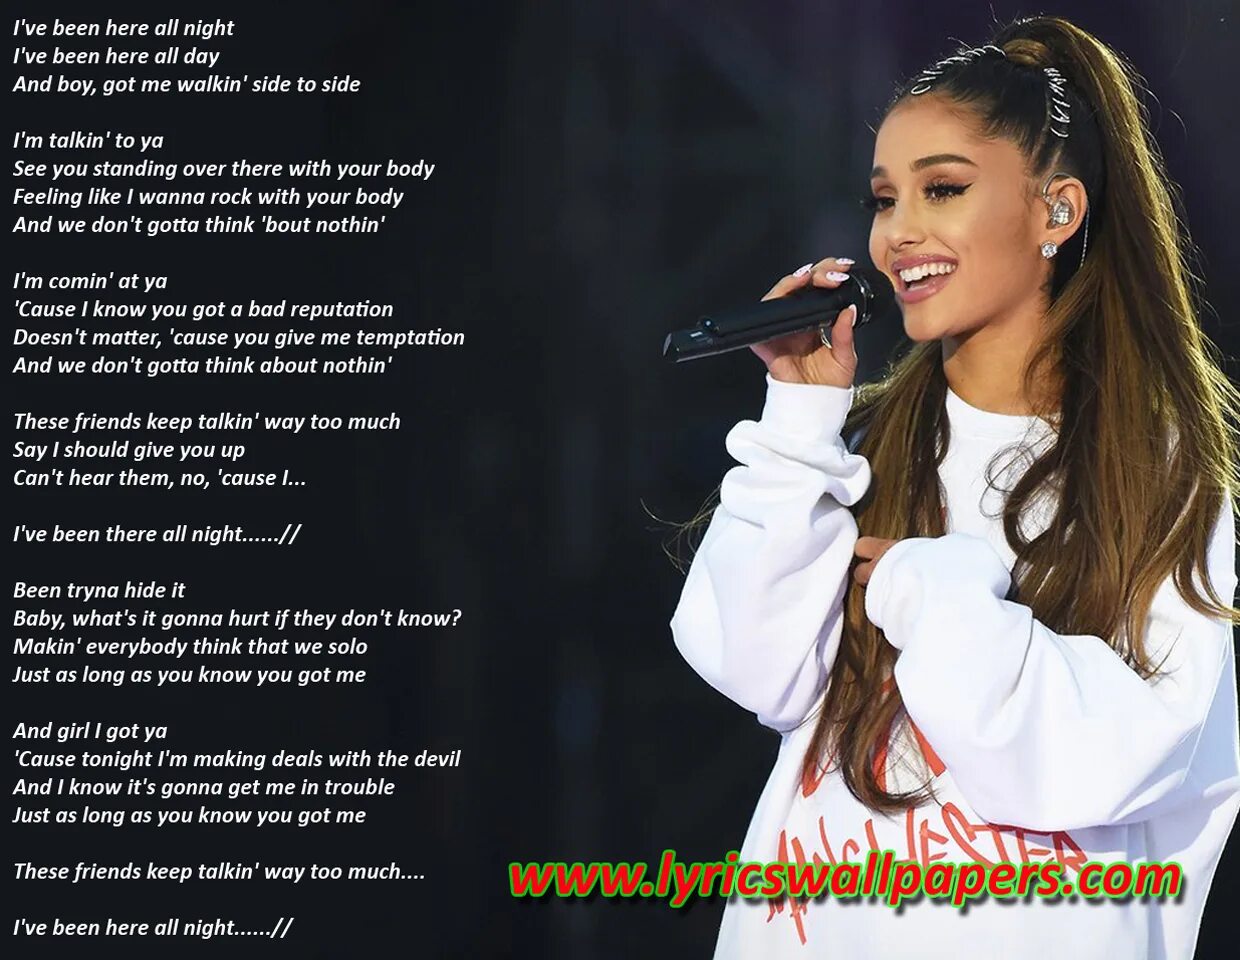 Yes and ariana текст. Side to Side Ariana grande текст. Ariana grande - all Night.